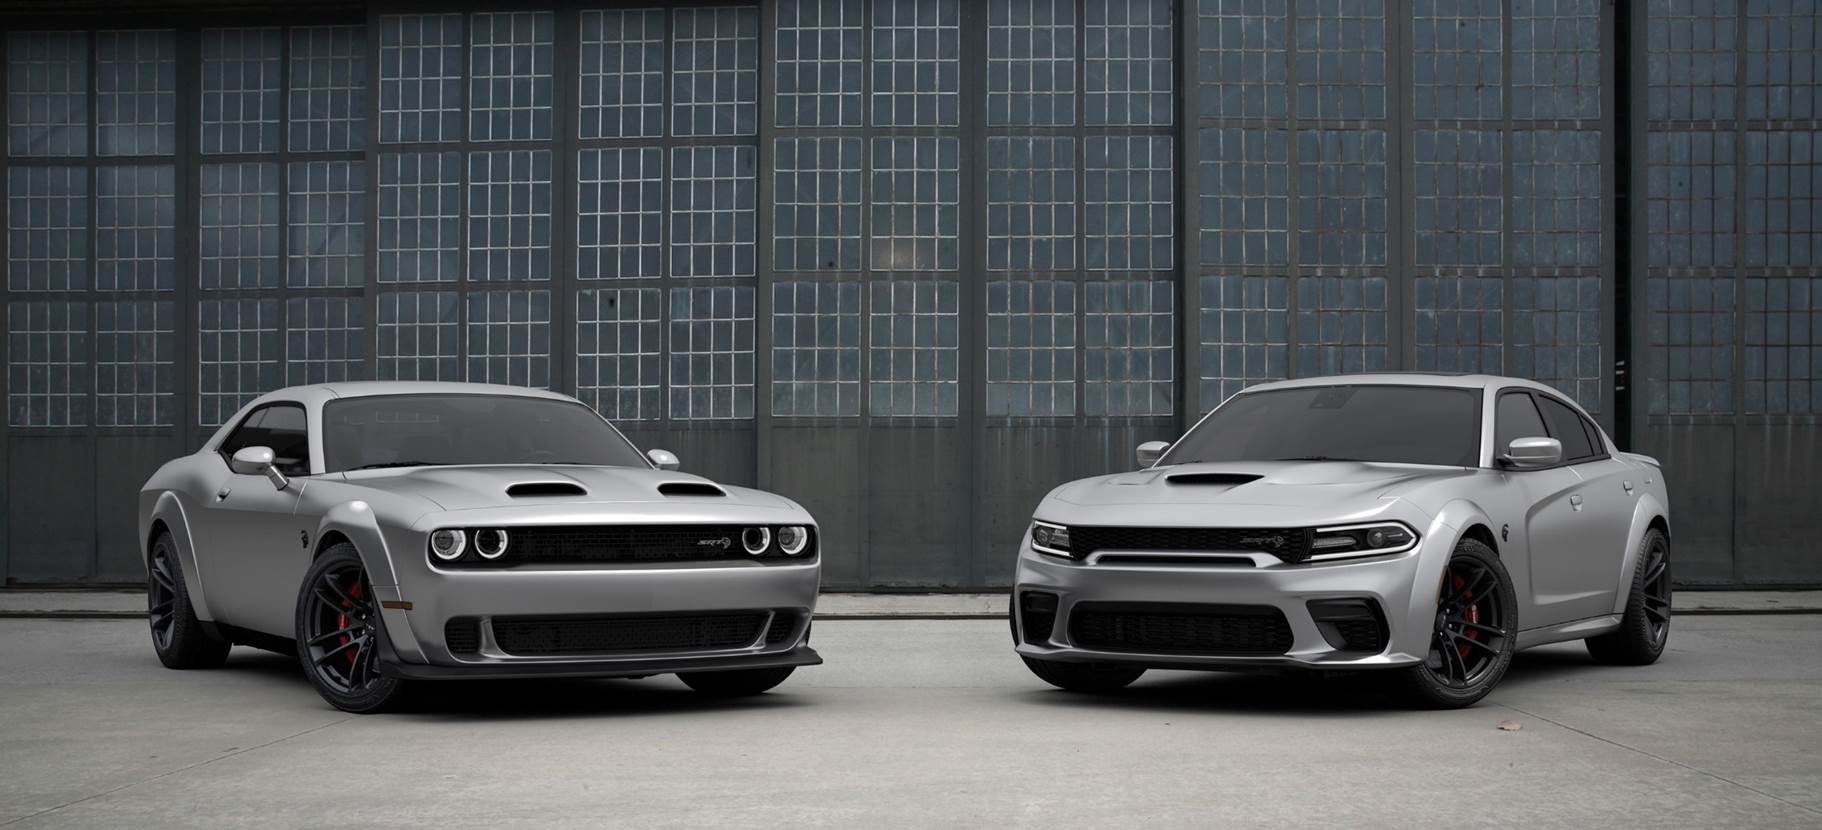 Dodge and Ram Dominate Mass-market Brands Second Straight Year in J.D. Power APEAL Study